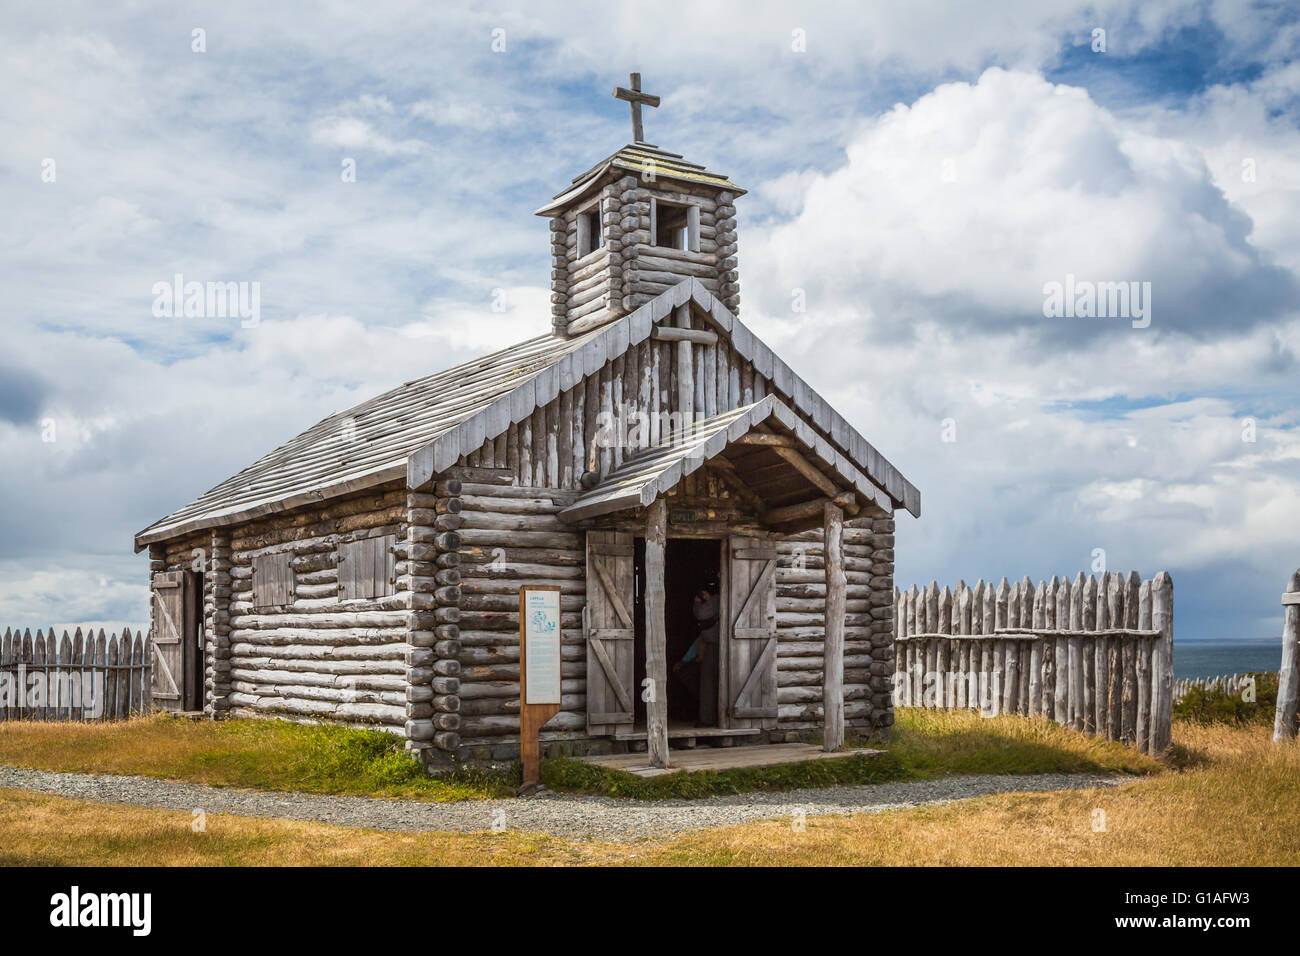 The historic church building at Fuerte Bulnes on the Strait of Magellan near Punta Arenas, Chile, South America. Stock Photo